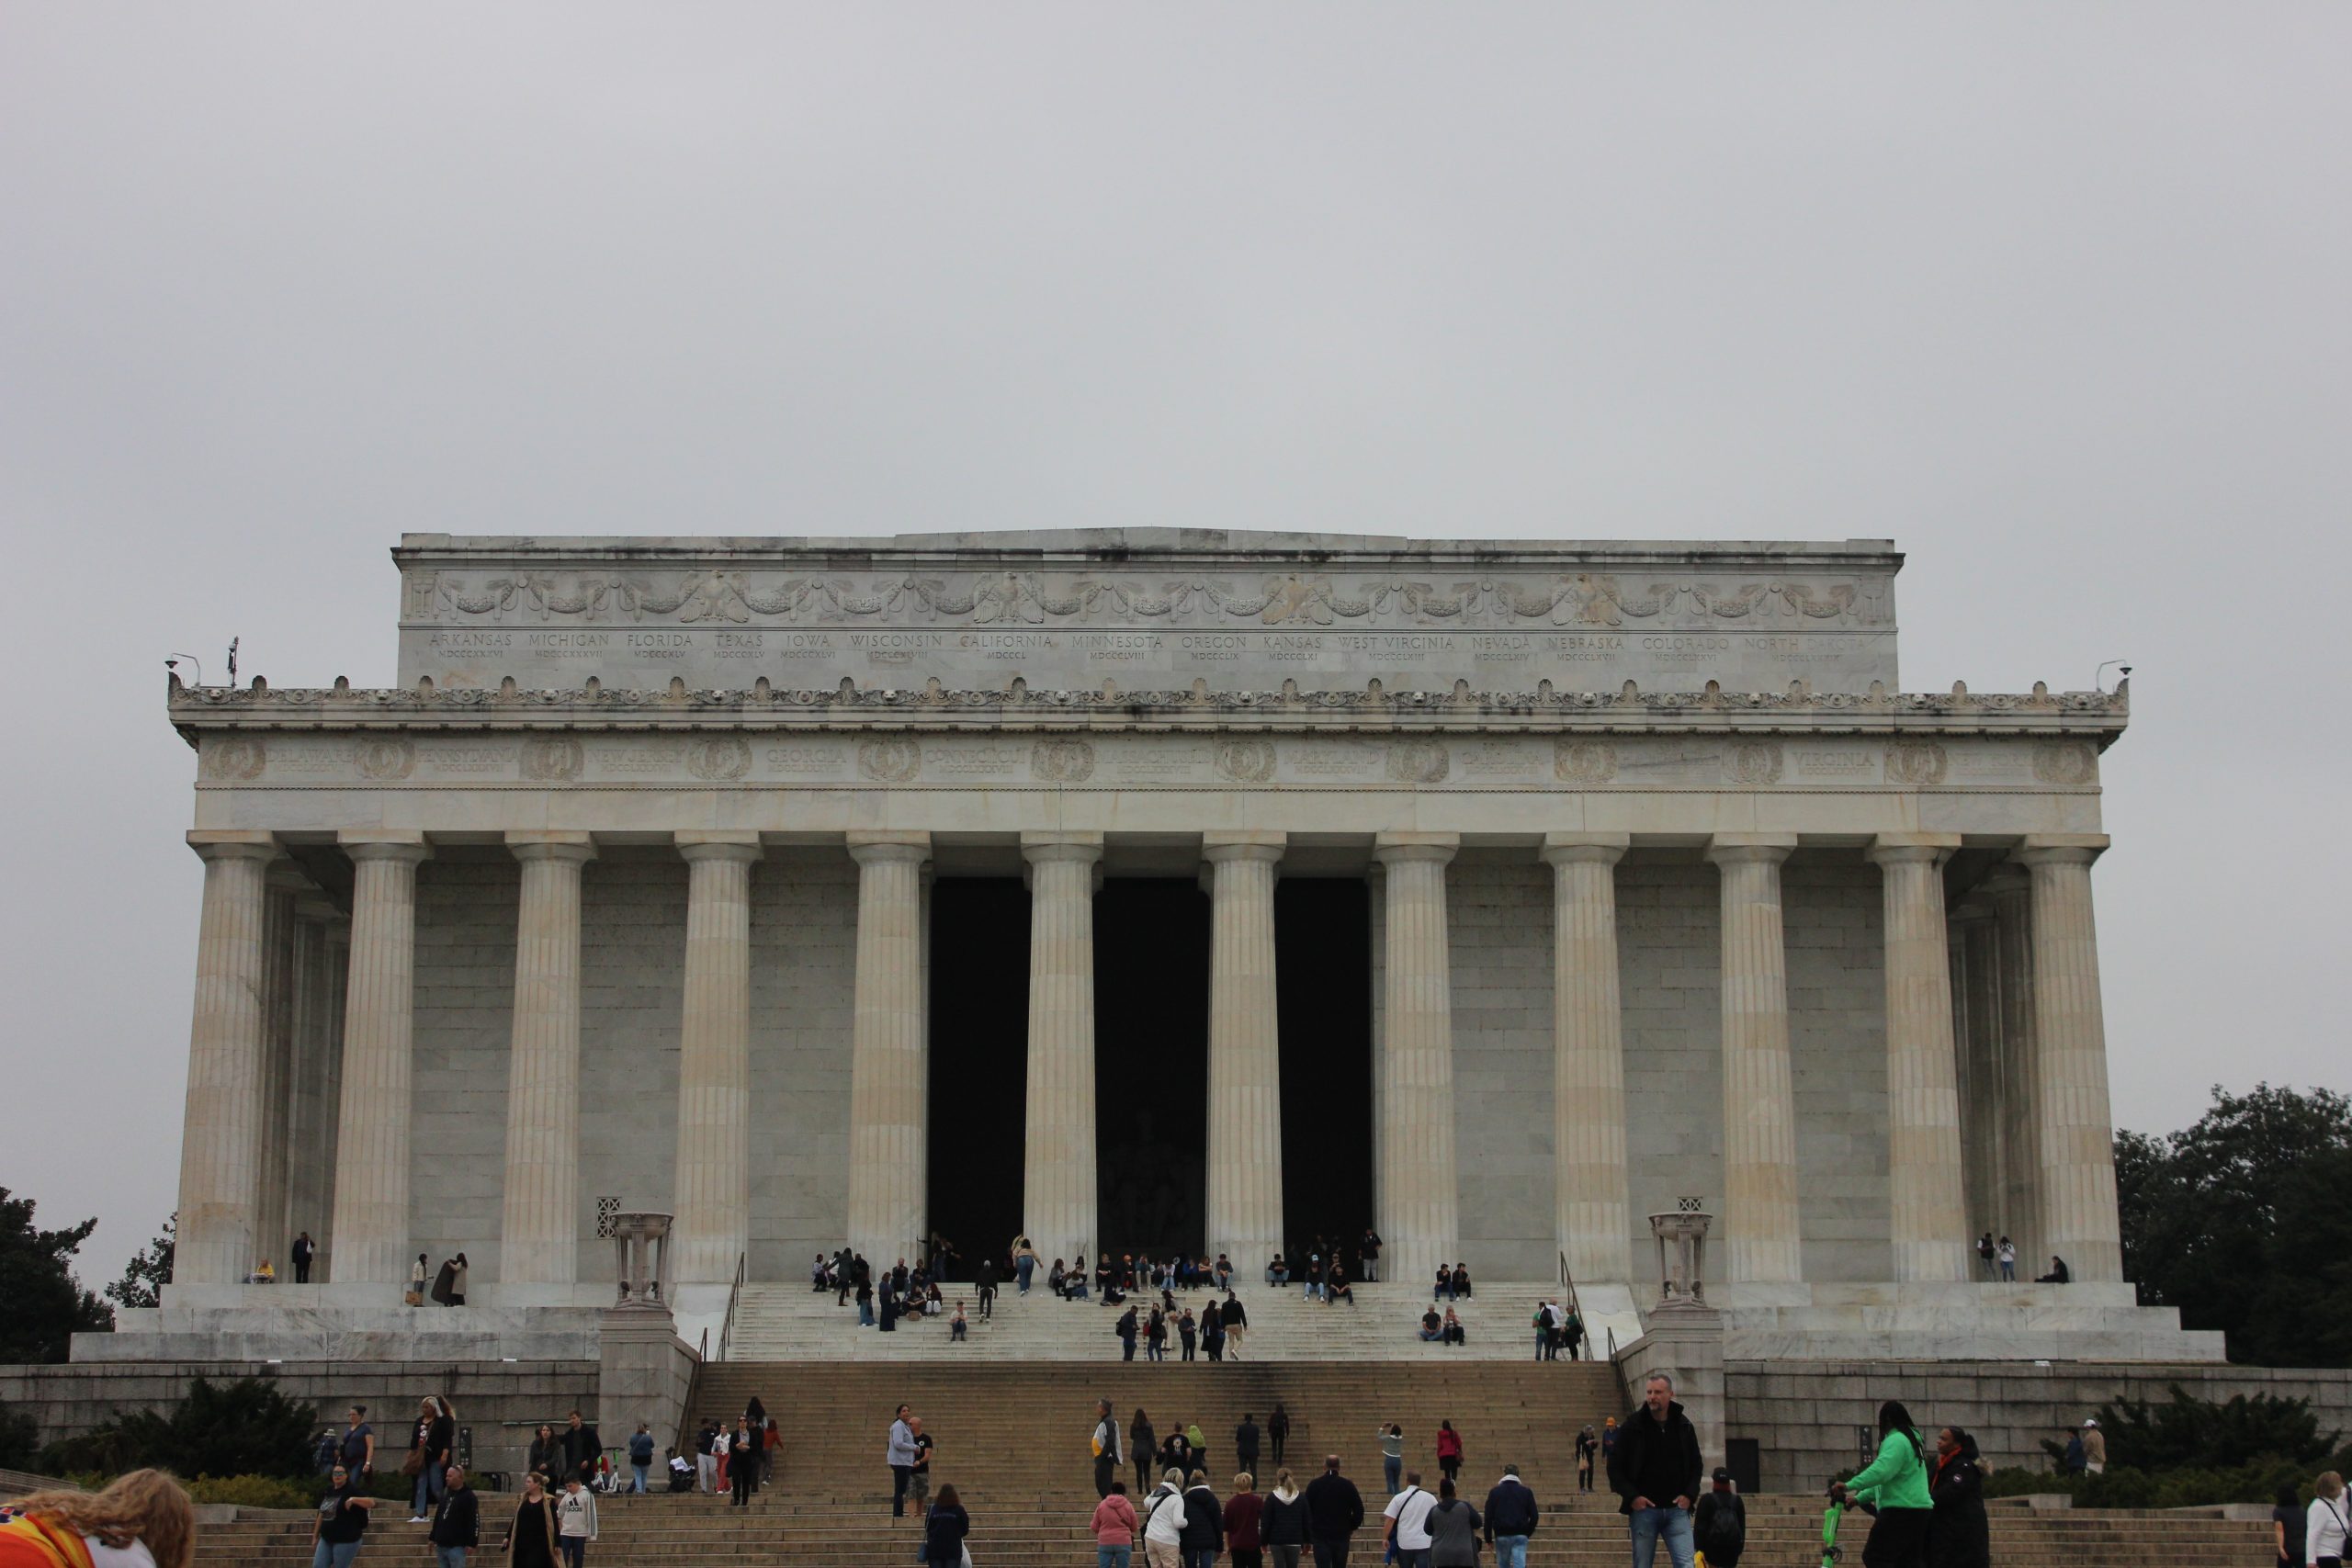 The Lincoln Memorial.Photo by The Signal Reporter Karsyn Coxie.